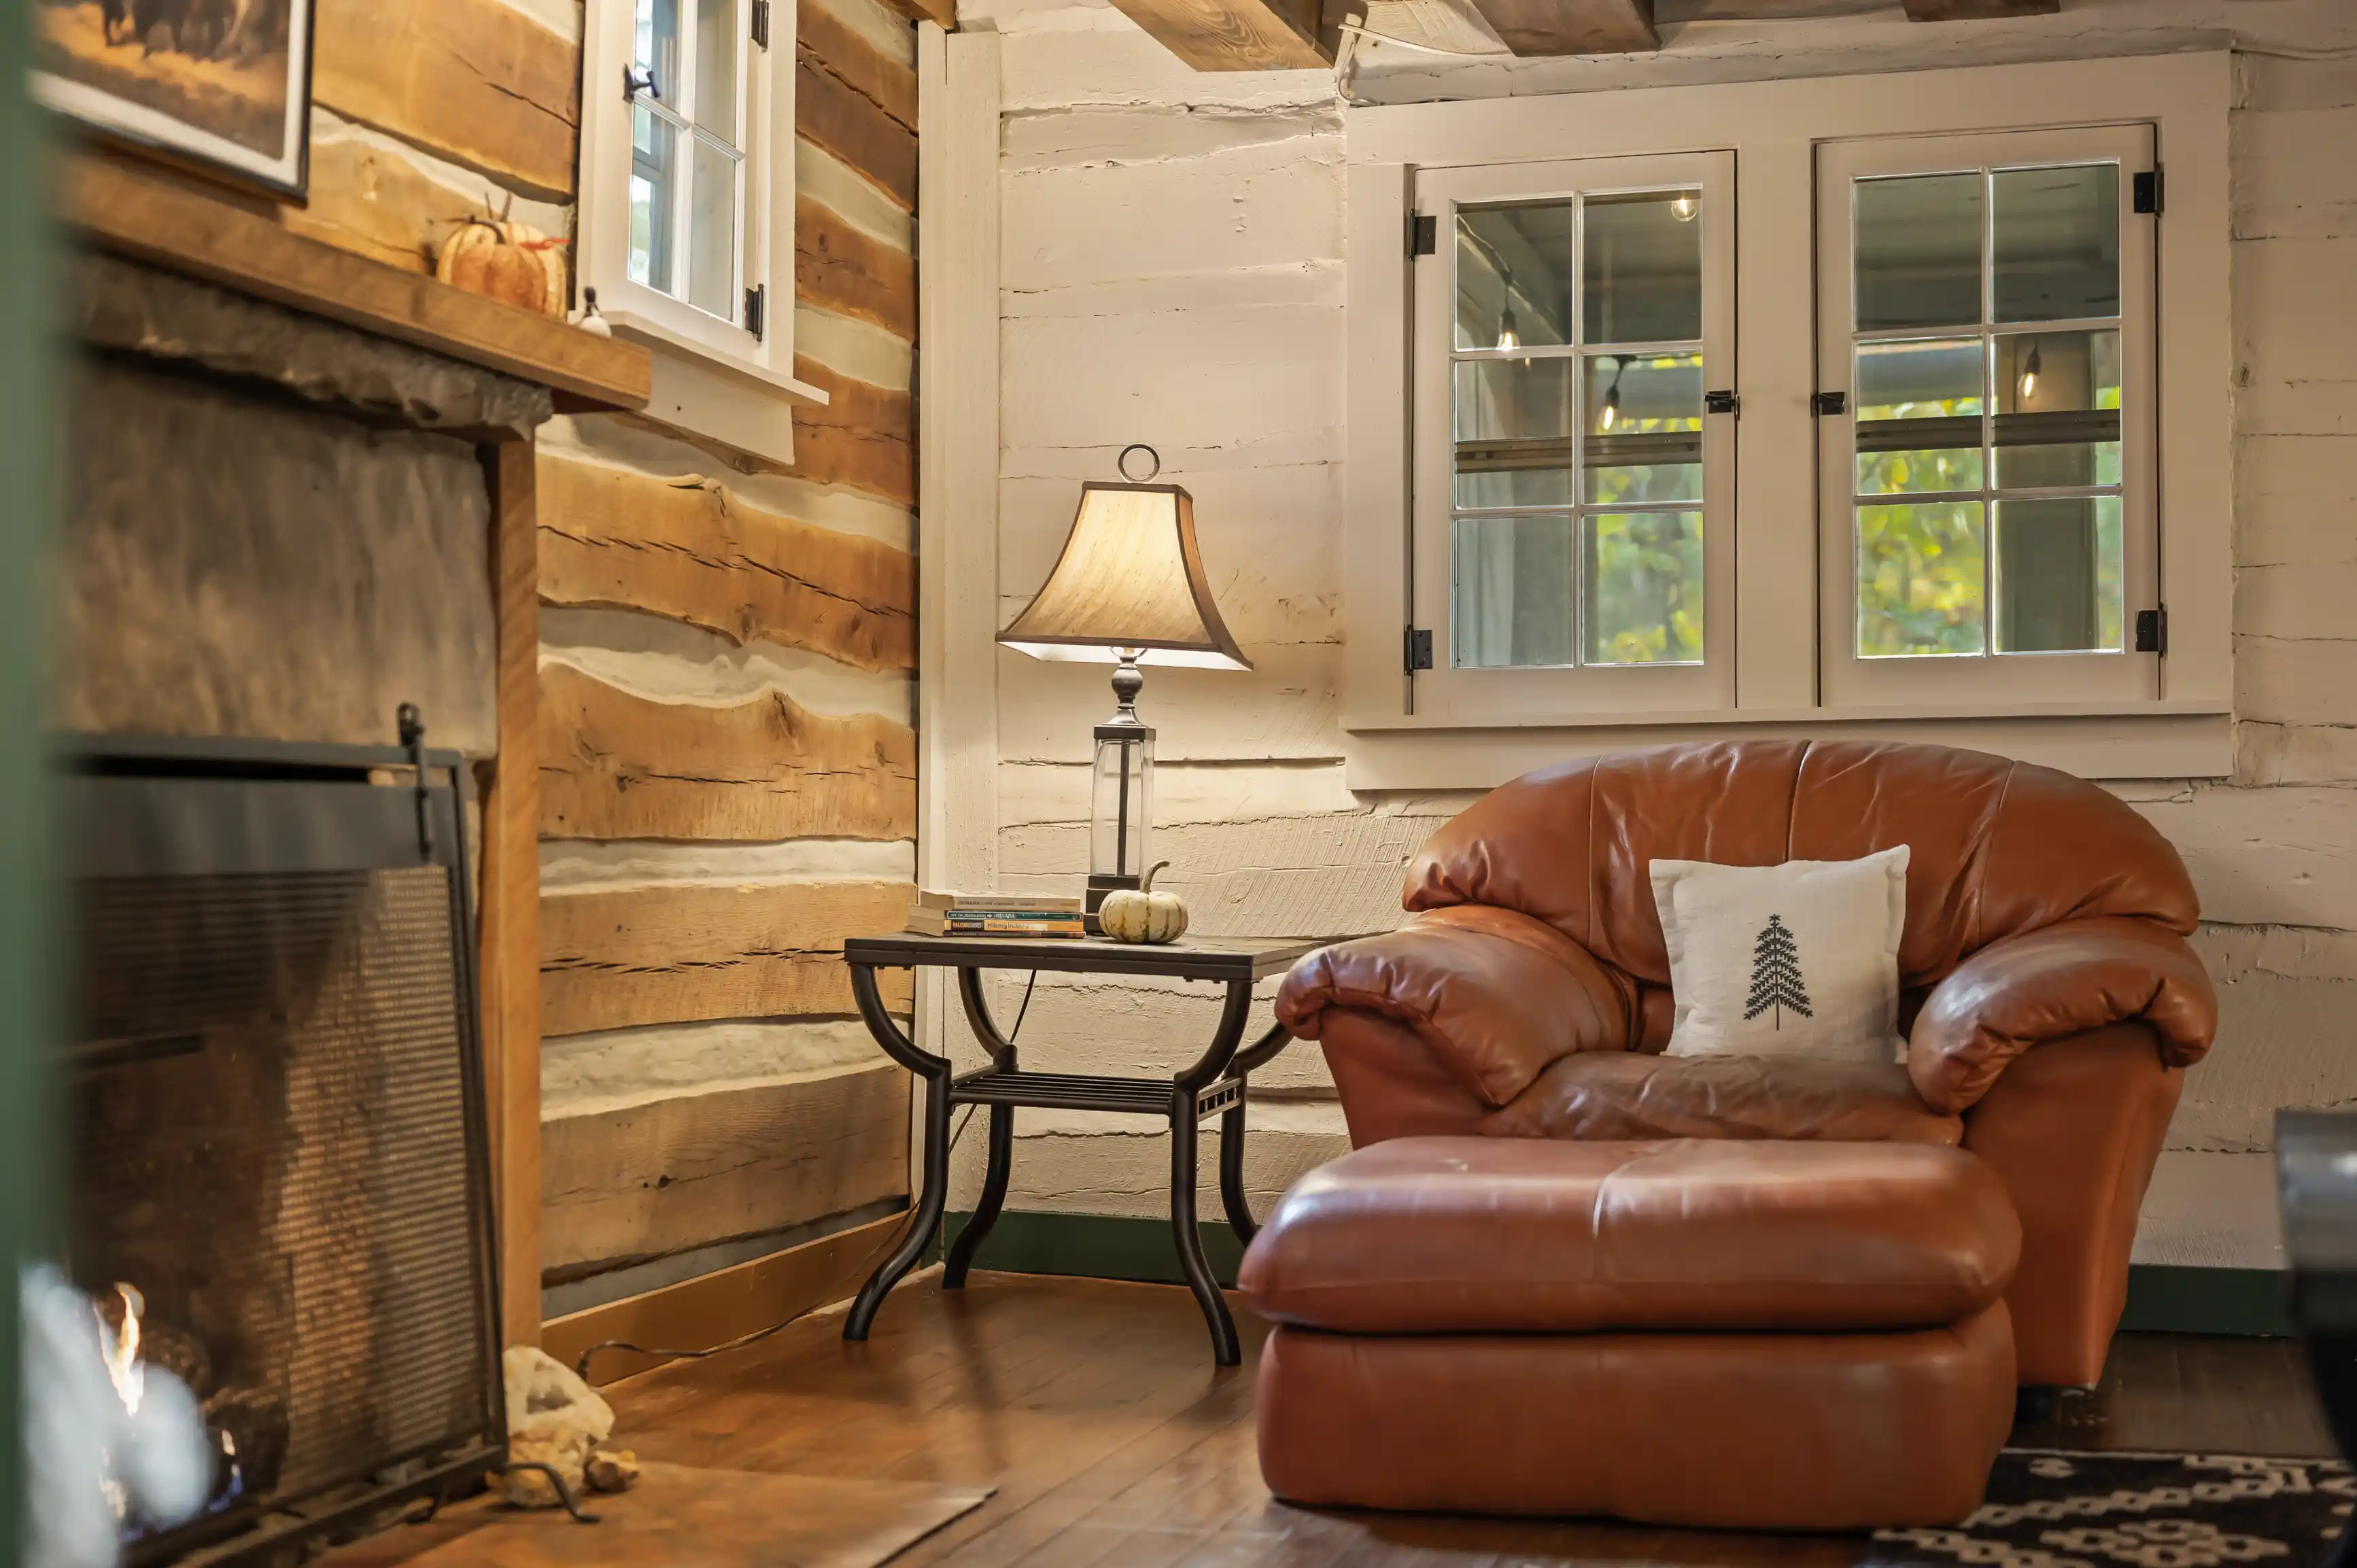 Cozy cabin interior with a plush leather armchair, wooden side table with a lamp, and part of a fireplace, against a rustic wooden wall with a window.